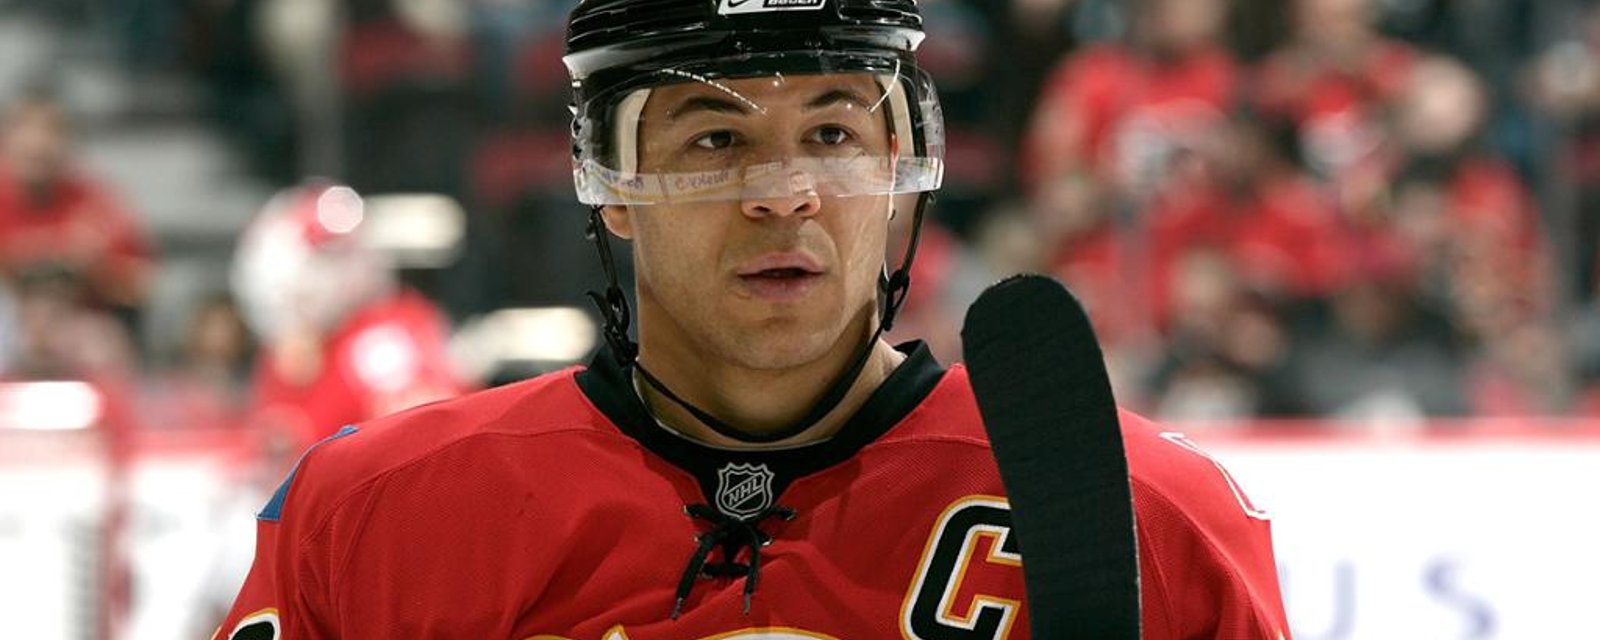 Jarome Iginla’s HHOF phone call did not go according to plans! 